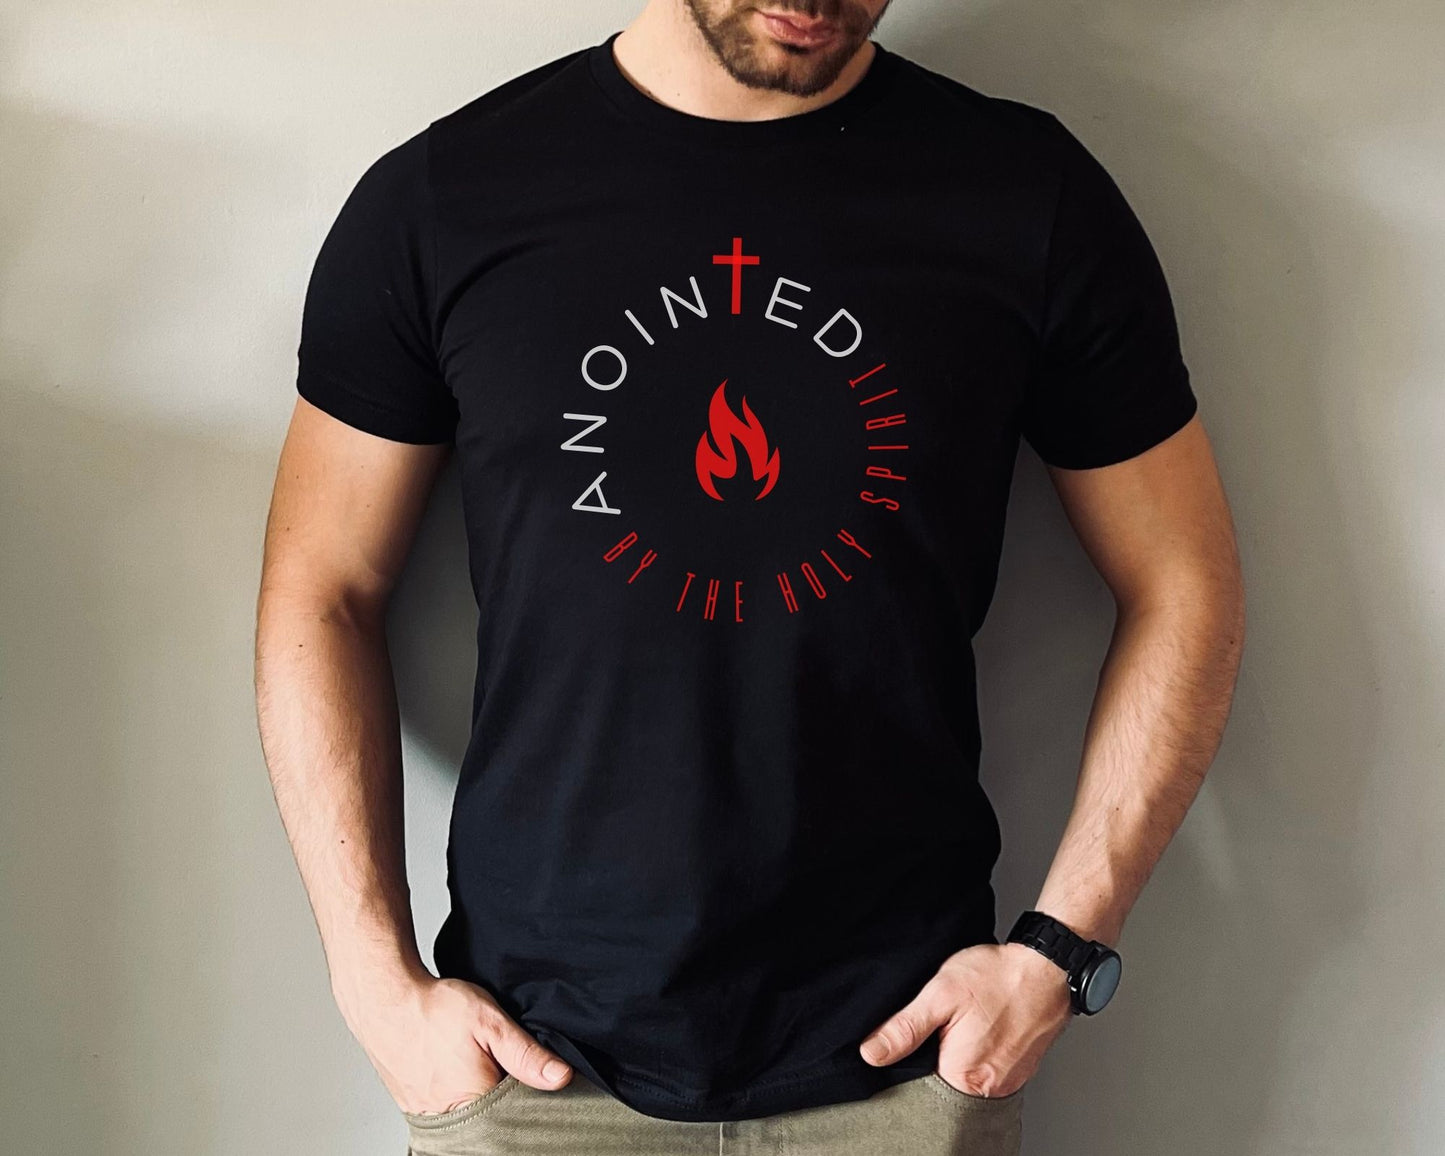 Anointed By The Holy Spirit Christian Mens T-Shirt